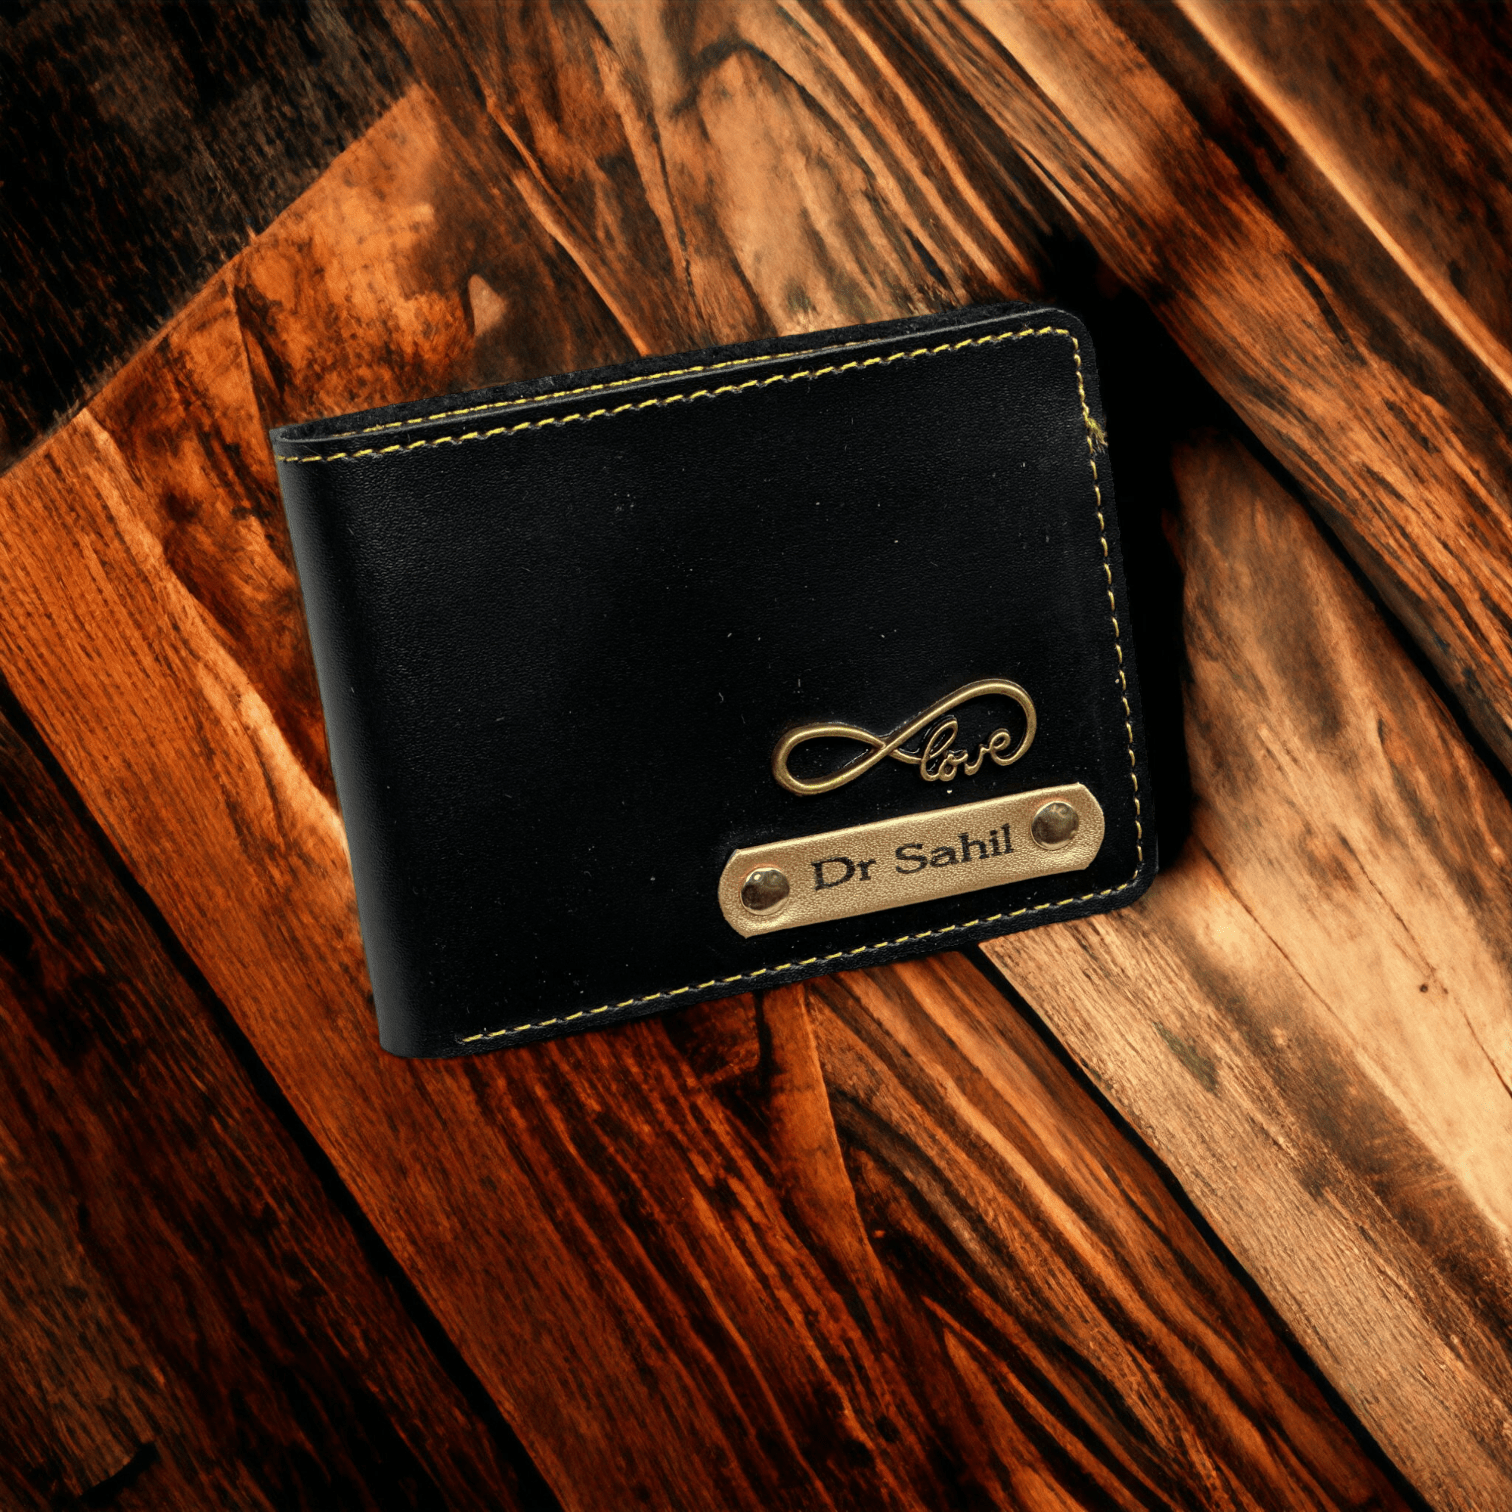 Customized Faux leather wallet Men's (Premium quality) Wallet With Name & Charm - Customized gift